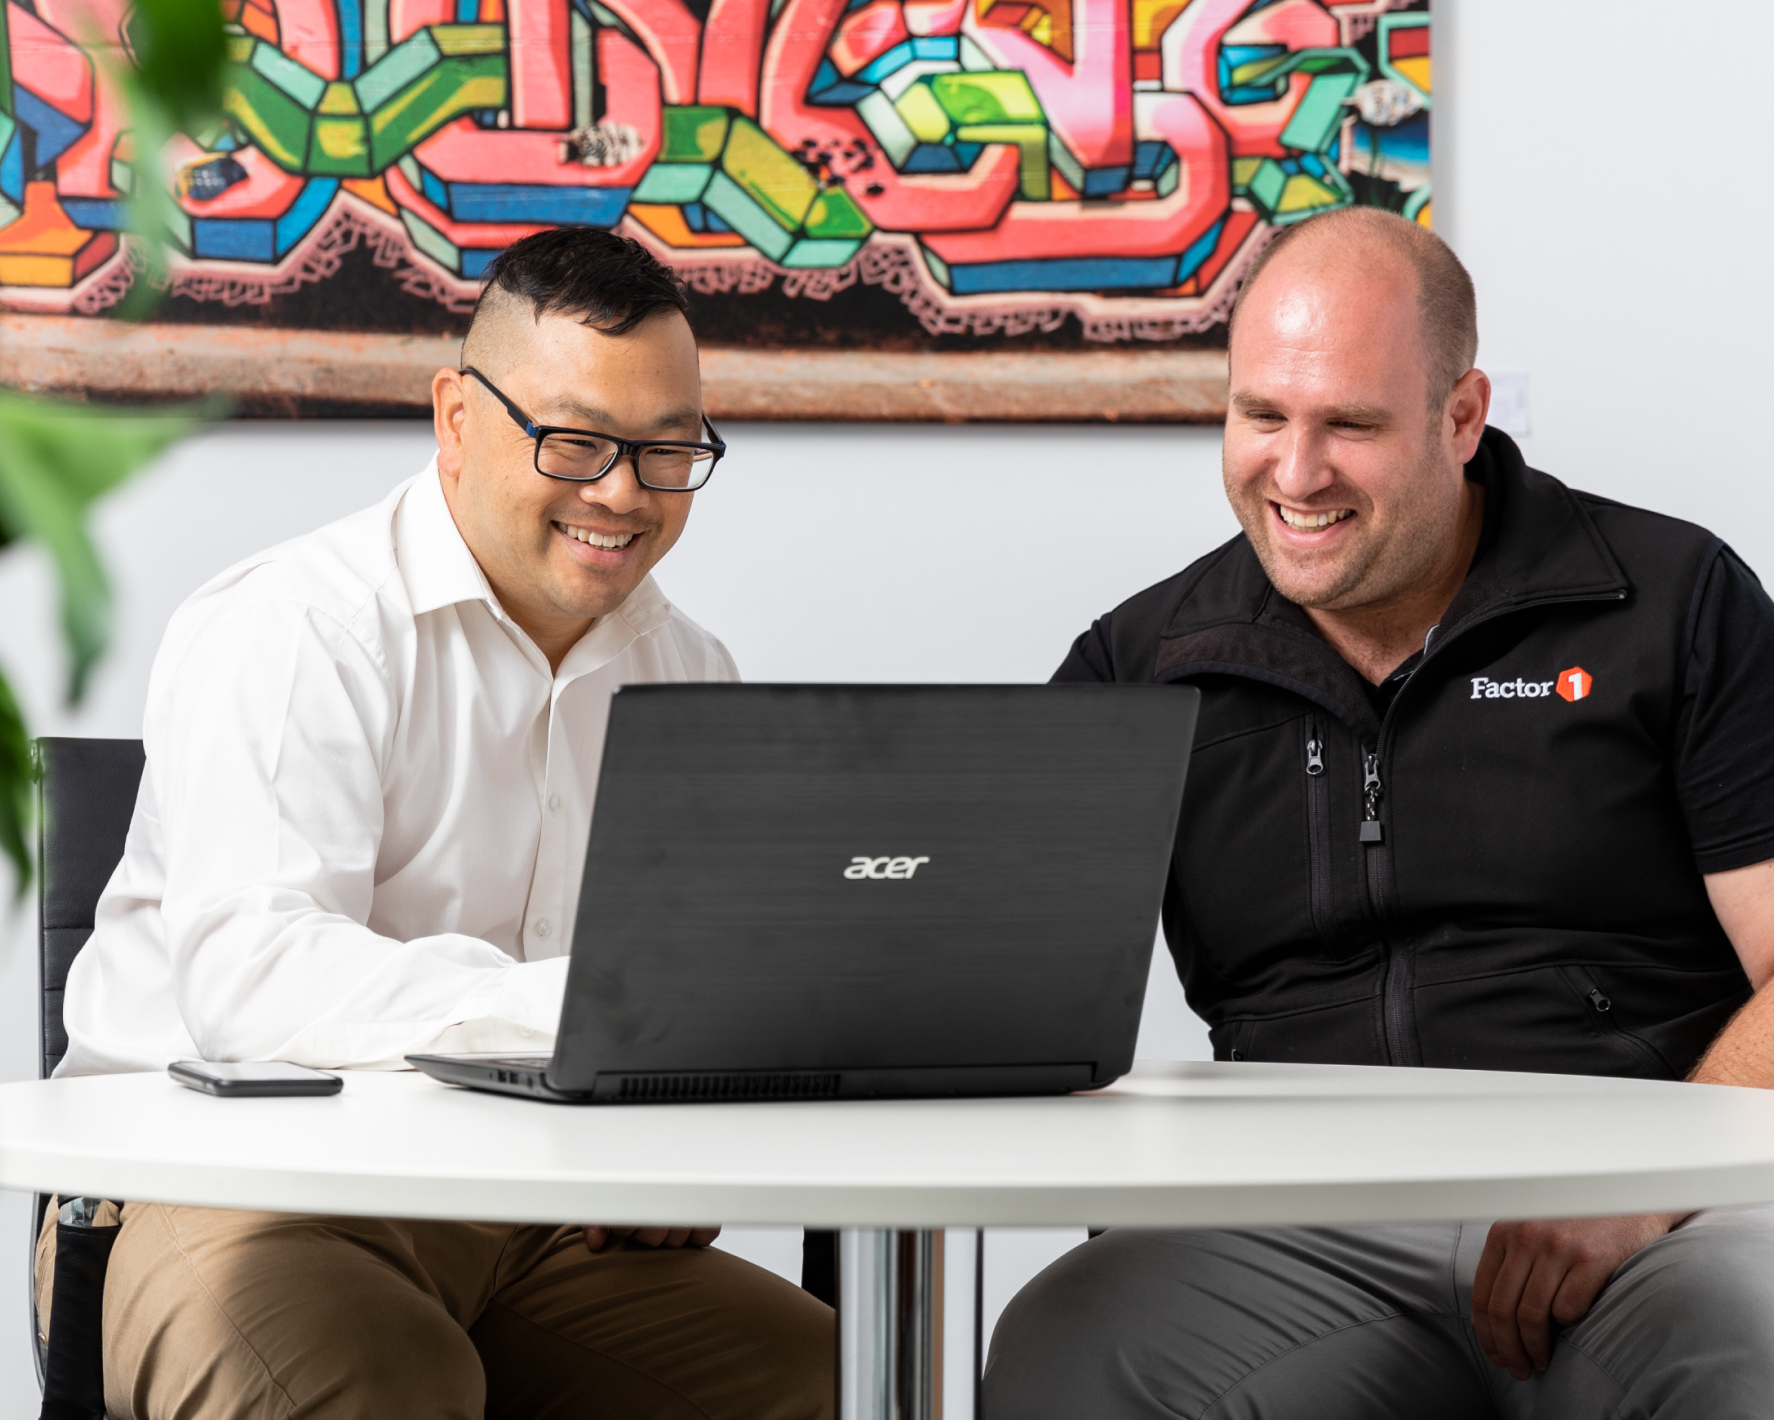 Two men sitting at a table and smiling at a laptop